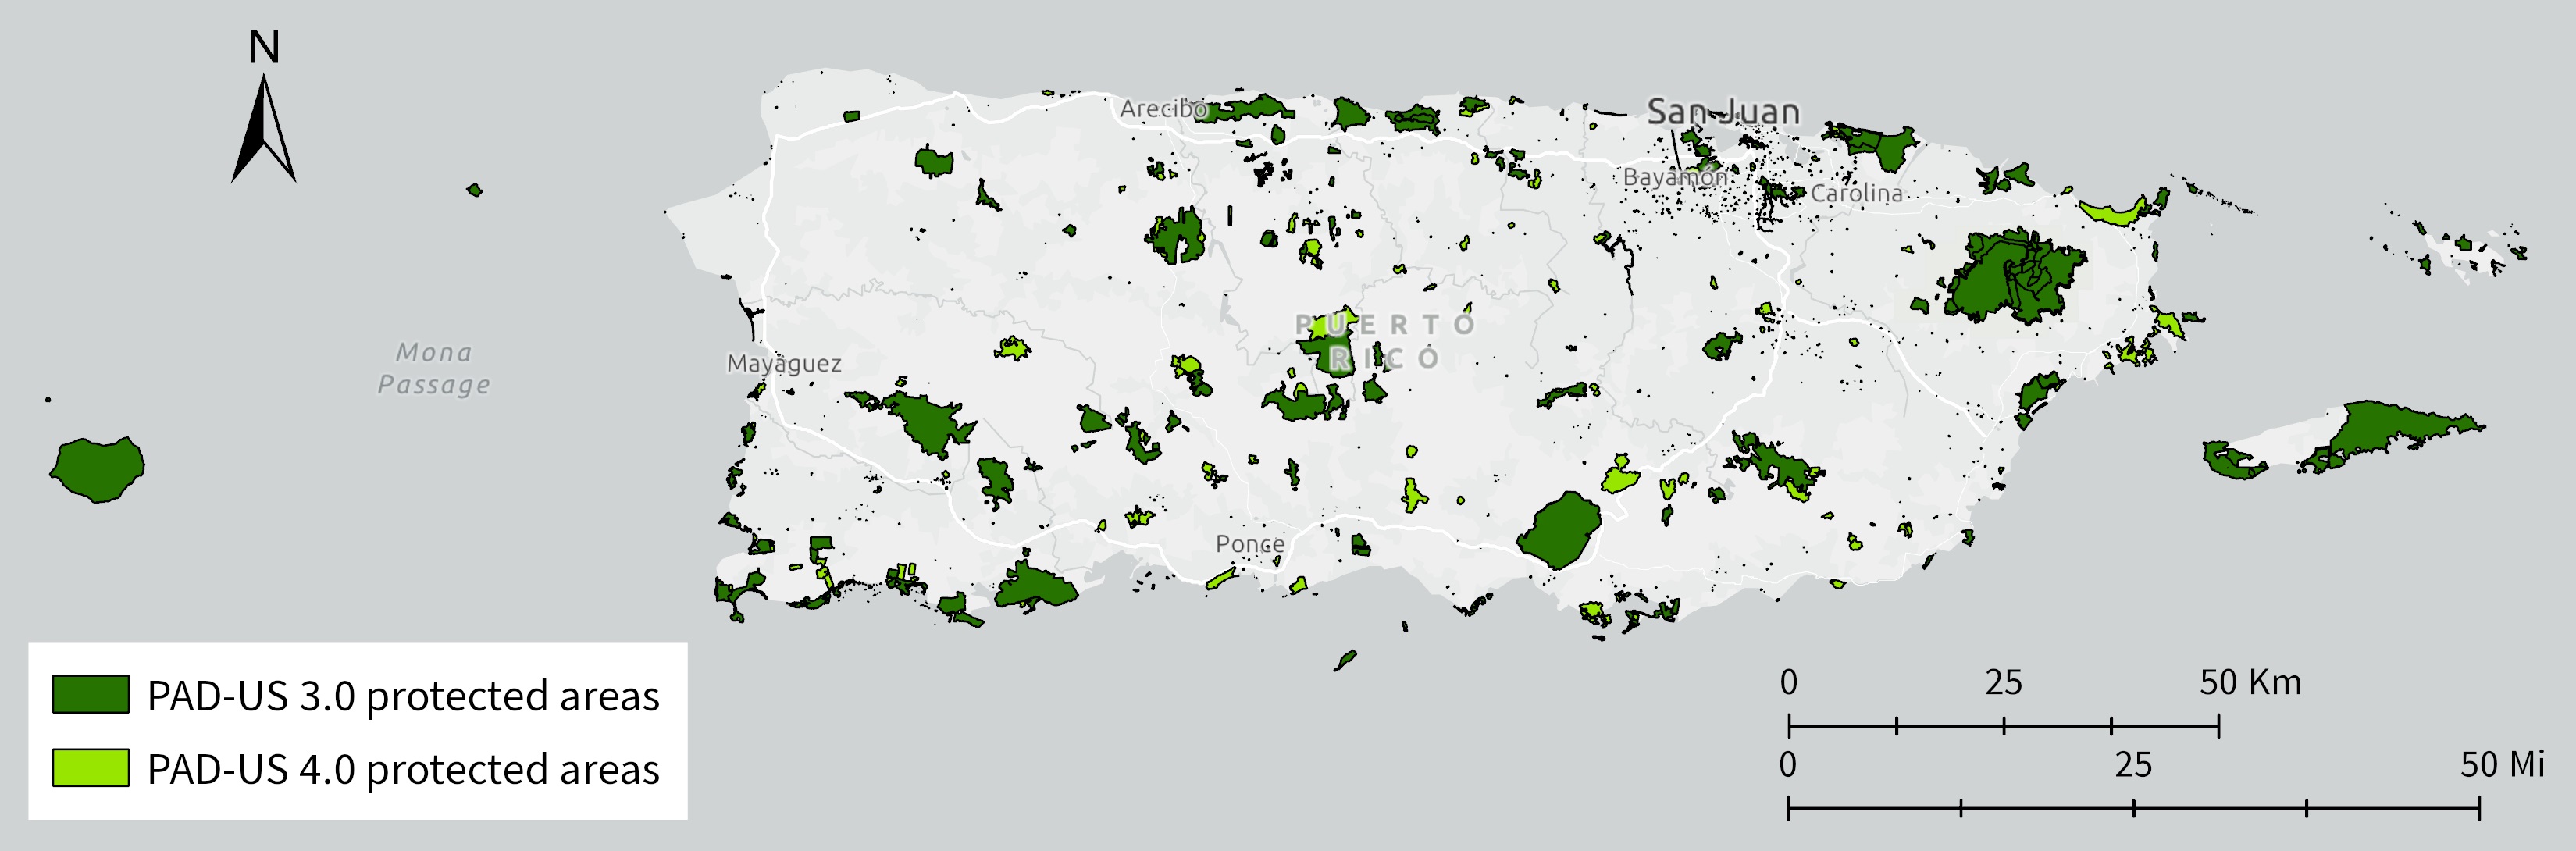 Map of Puerto Rico on gray basemap showing a previous version of protected areas in dark green and a large number of newly added protected areas in bright green.